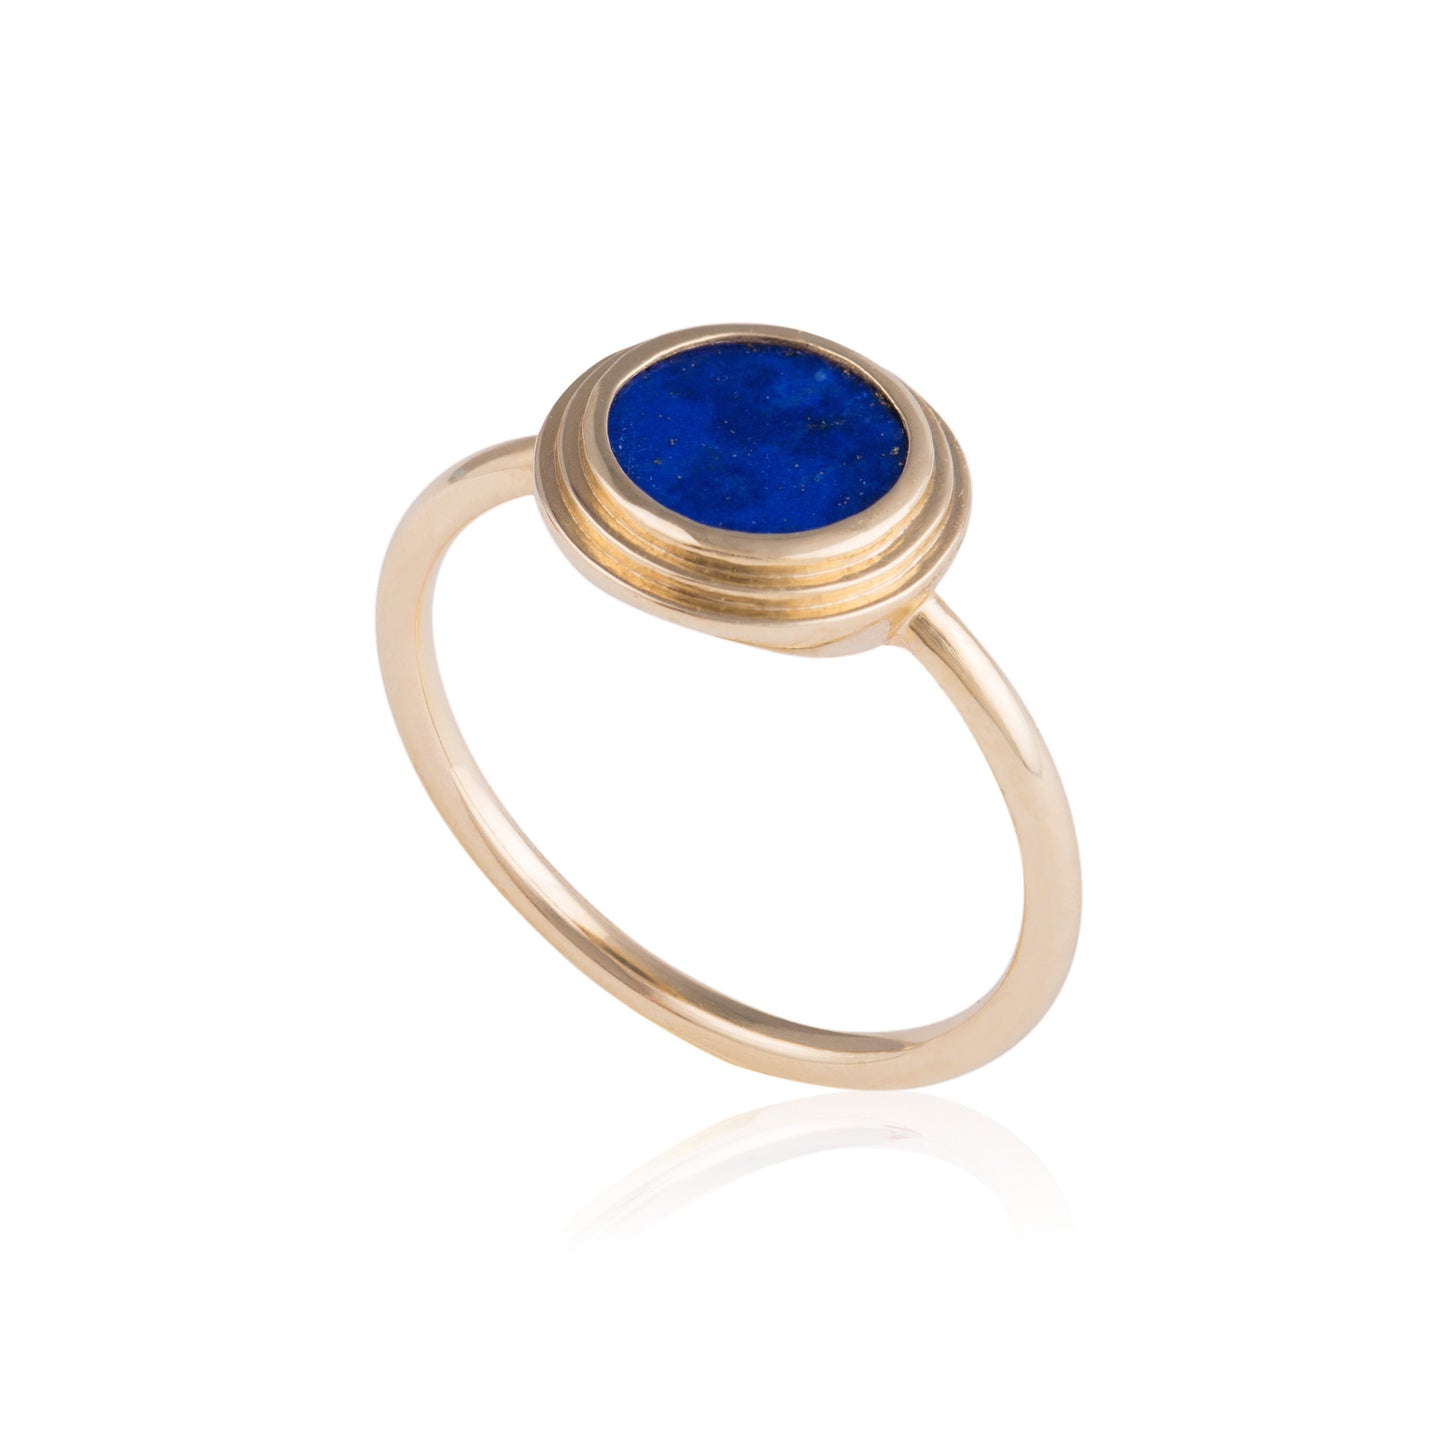 ASCENT Gold Ring with Lapis Lazuli Stone